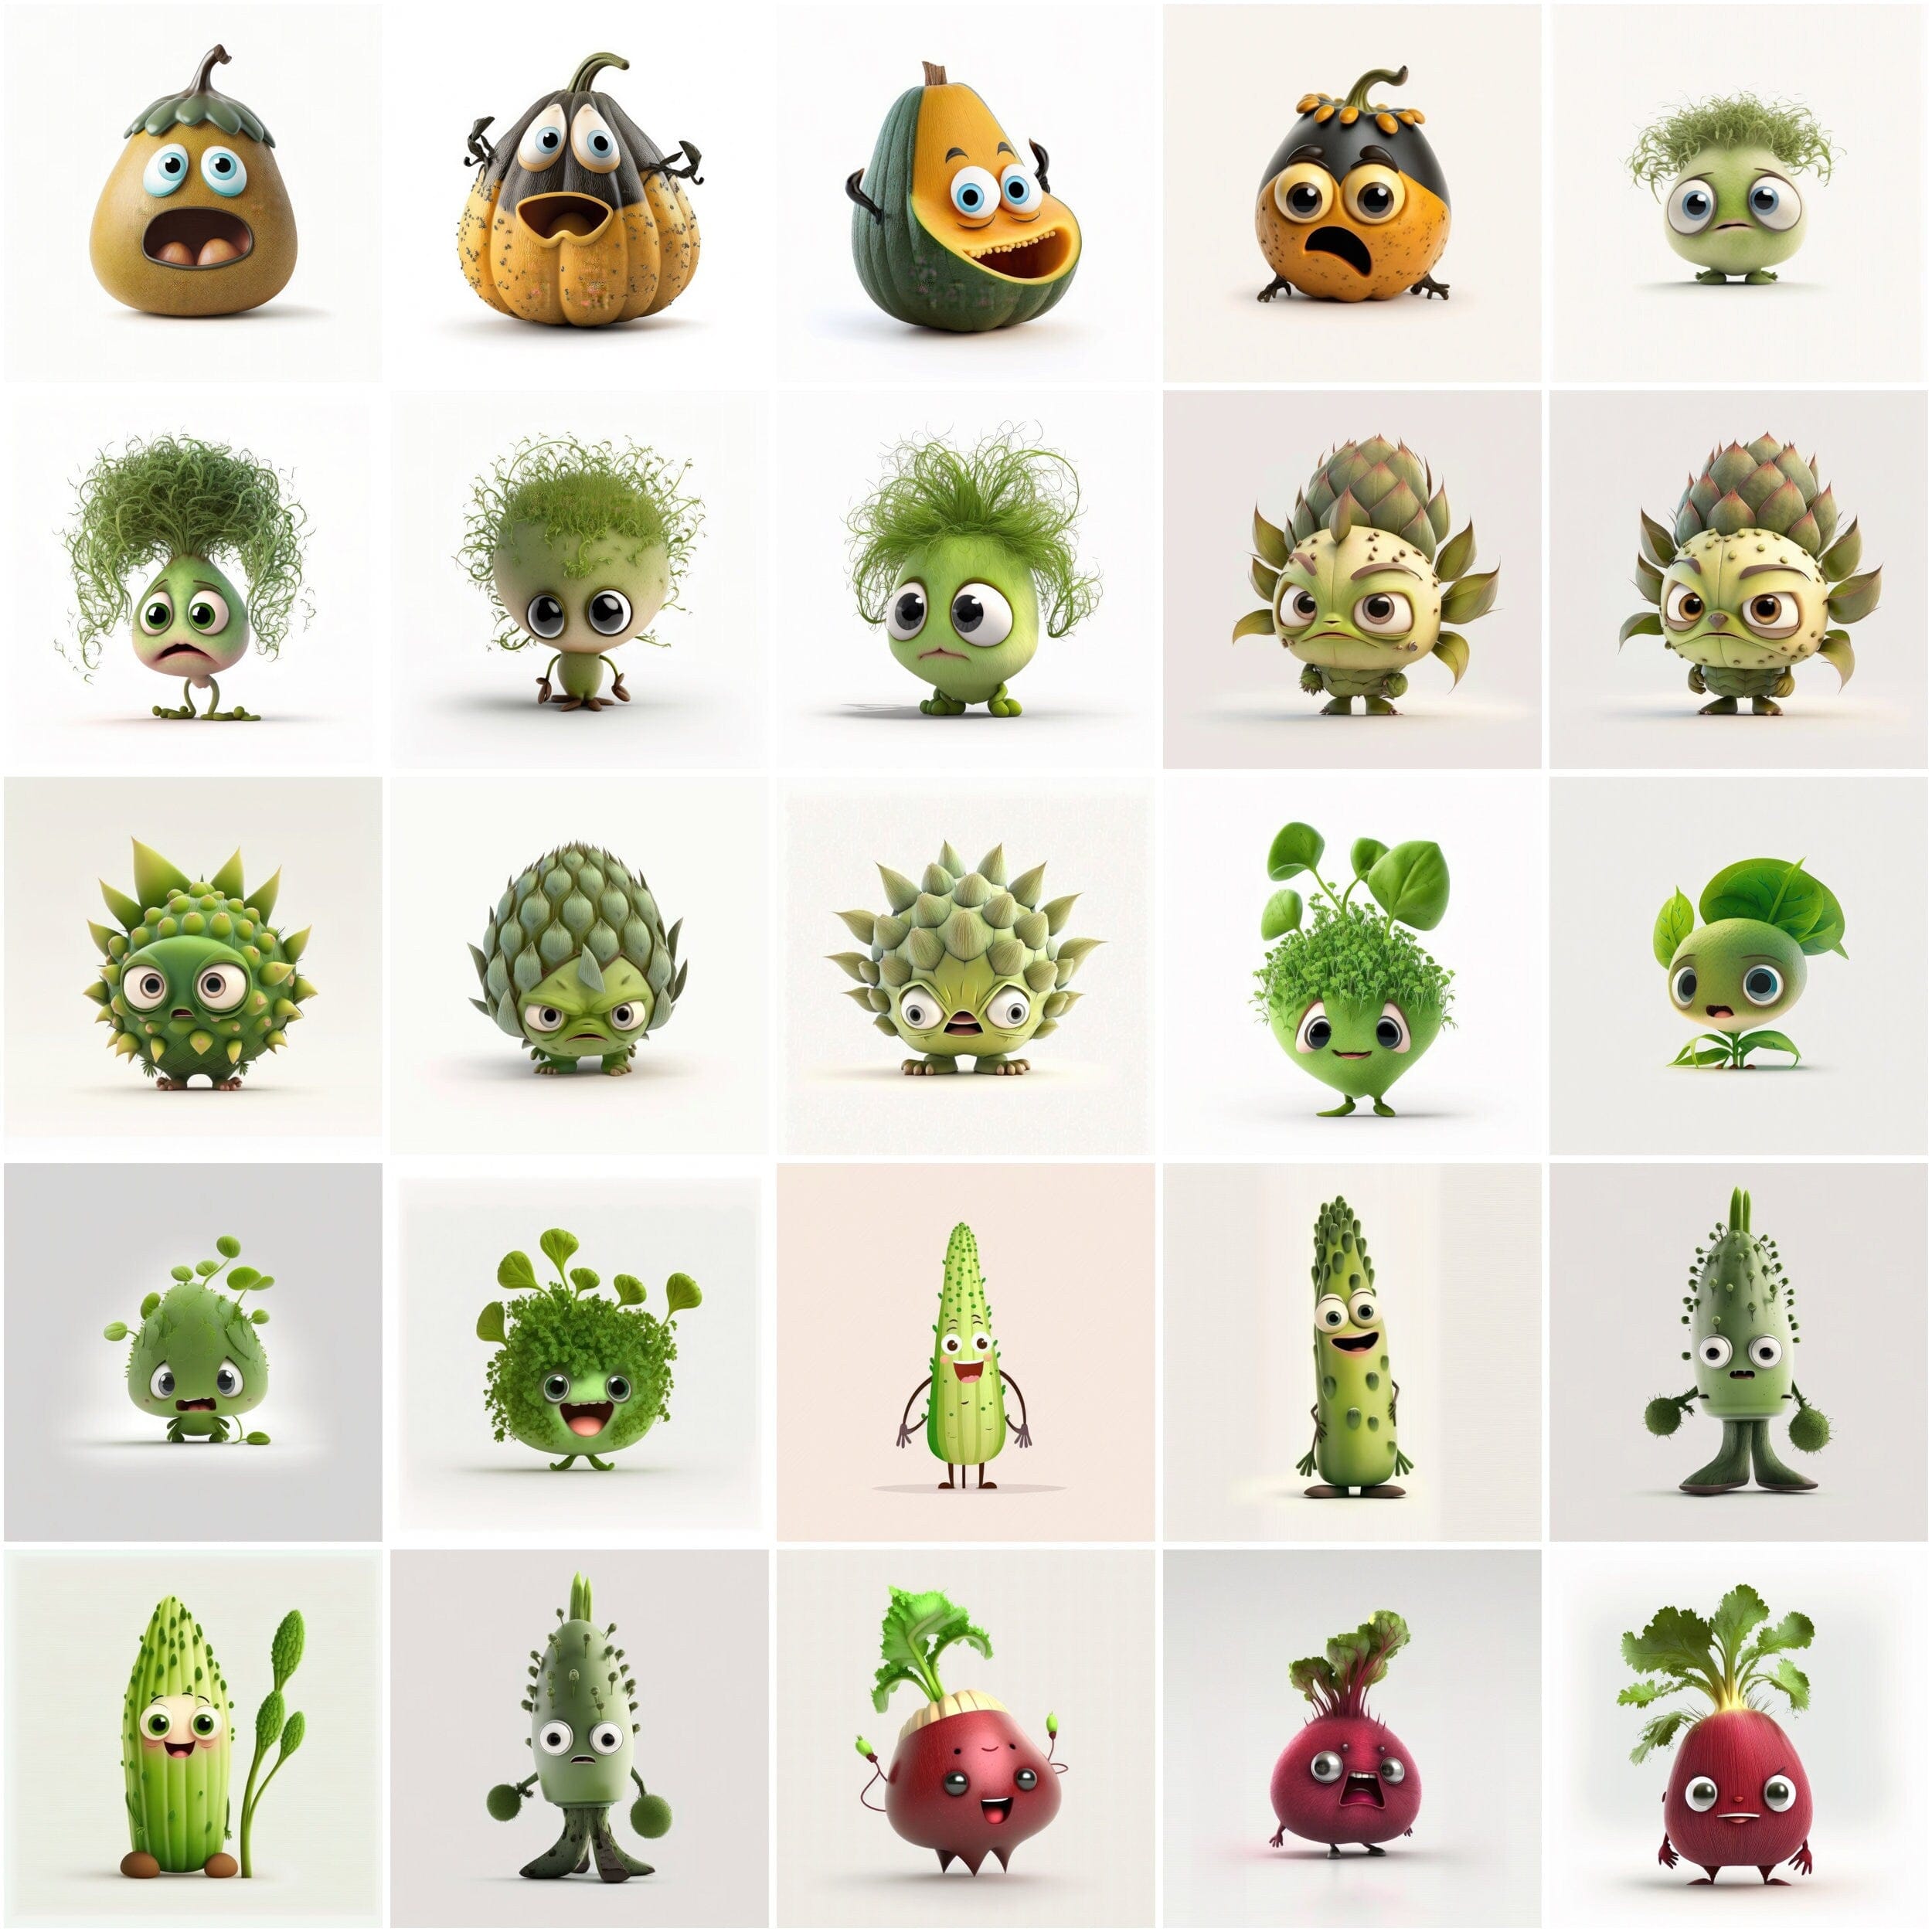 Bundle of 200+ Funny Vegetable Images with No Background and Shadow Background, Humorous Vegetable Images - Perfect for Posters, Stickers Digital Download Sumobundle